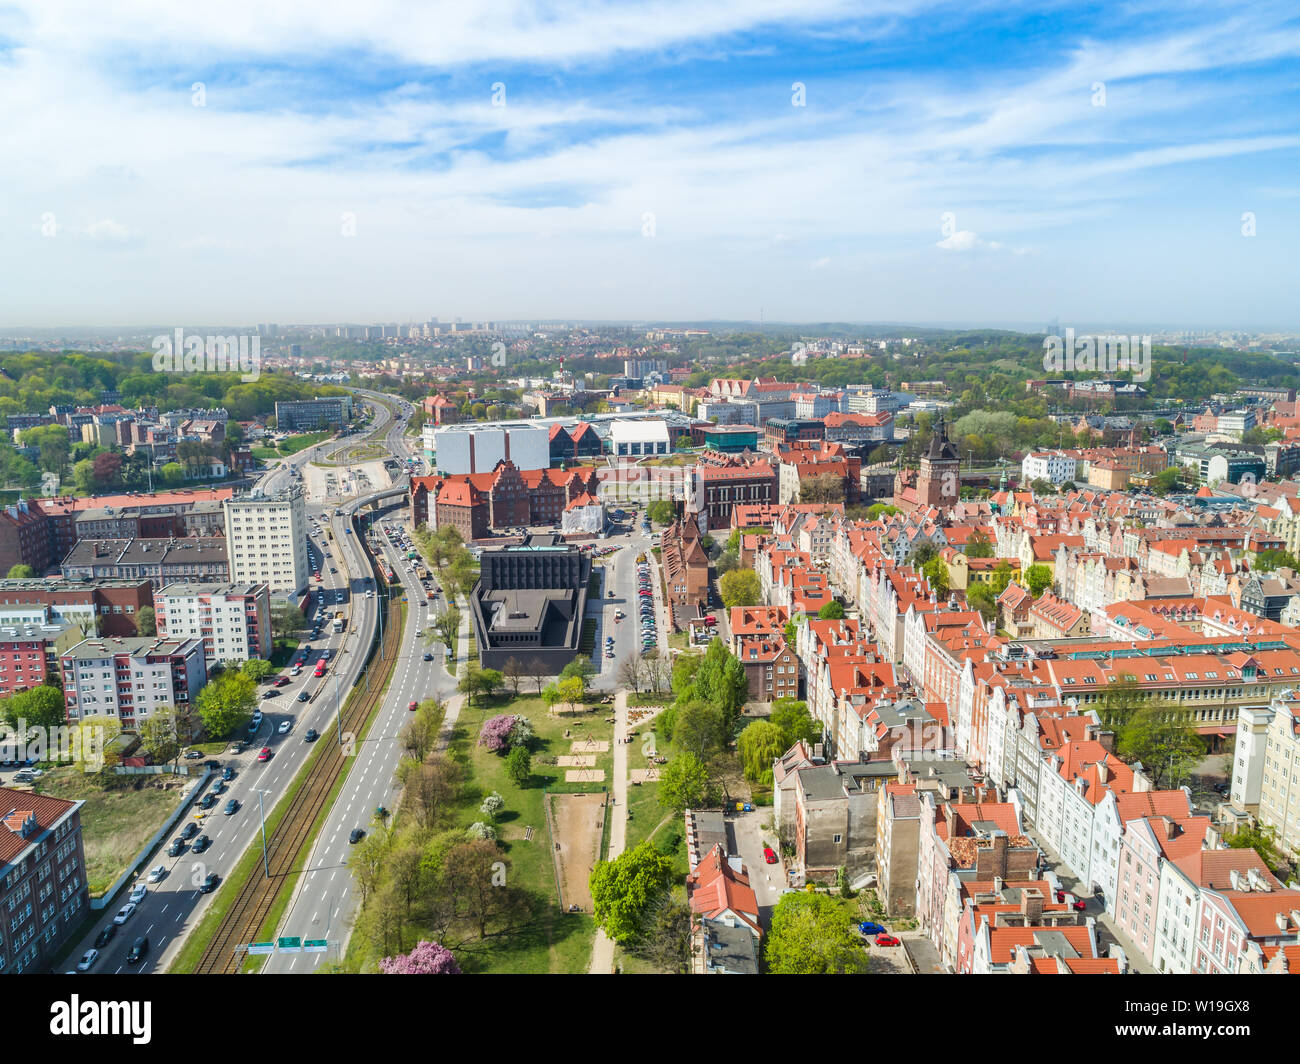 Gdańsk from a bird's eye view. A city landscape with an apparent Shakespearean Theater. Tourist attractions and monuments of the old town. Stock Photo